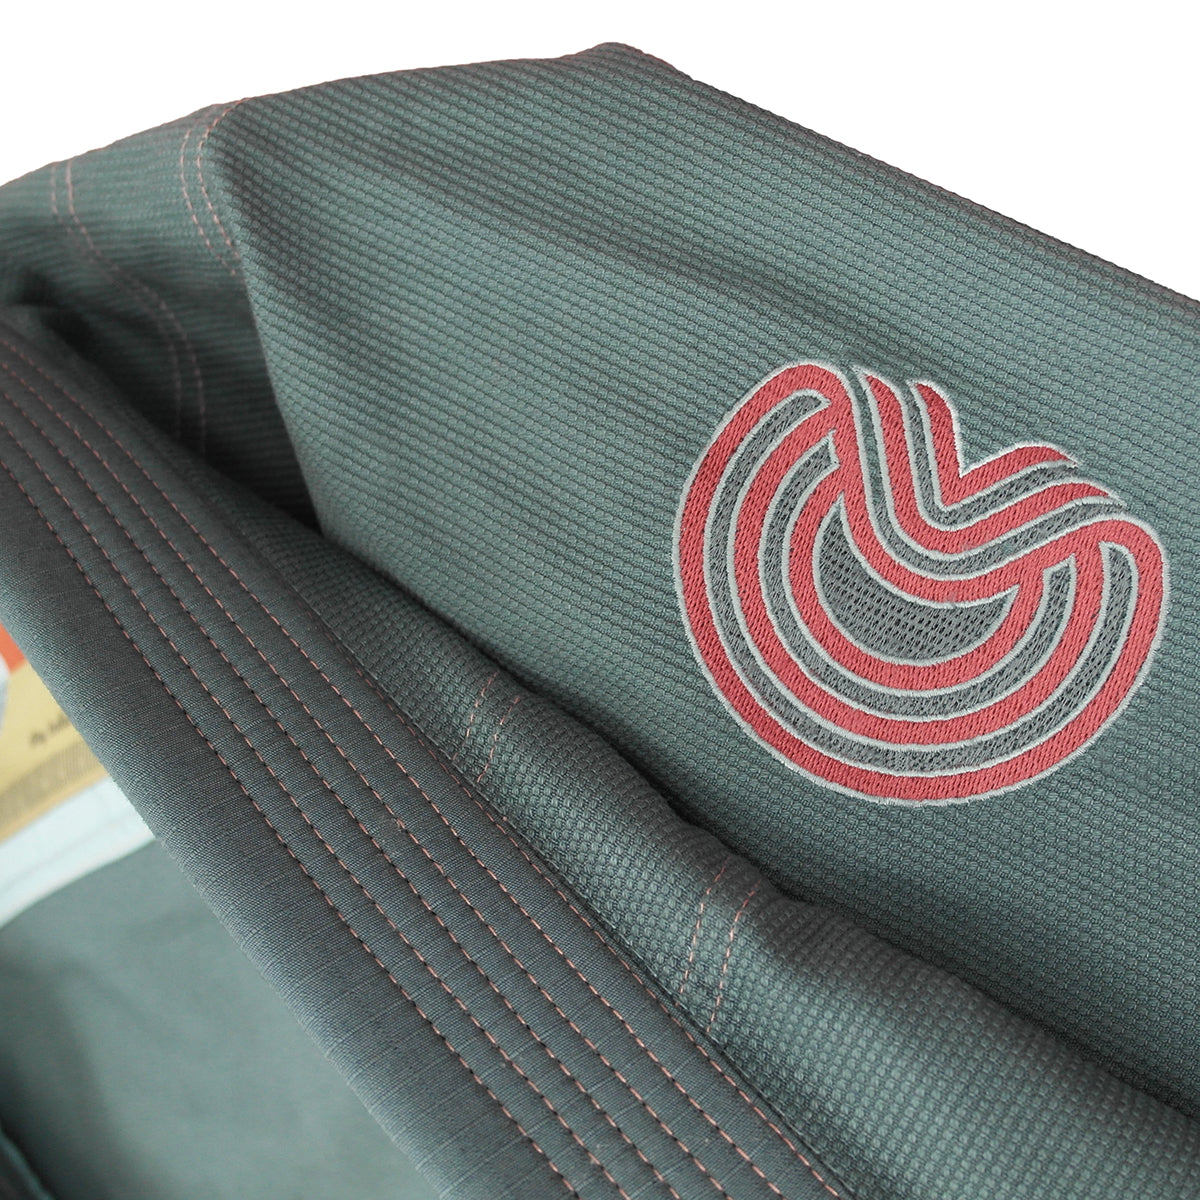 Chaos and Order Elements BJJ Kimono - Gray Chaos and Order